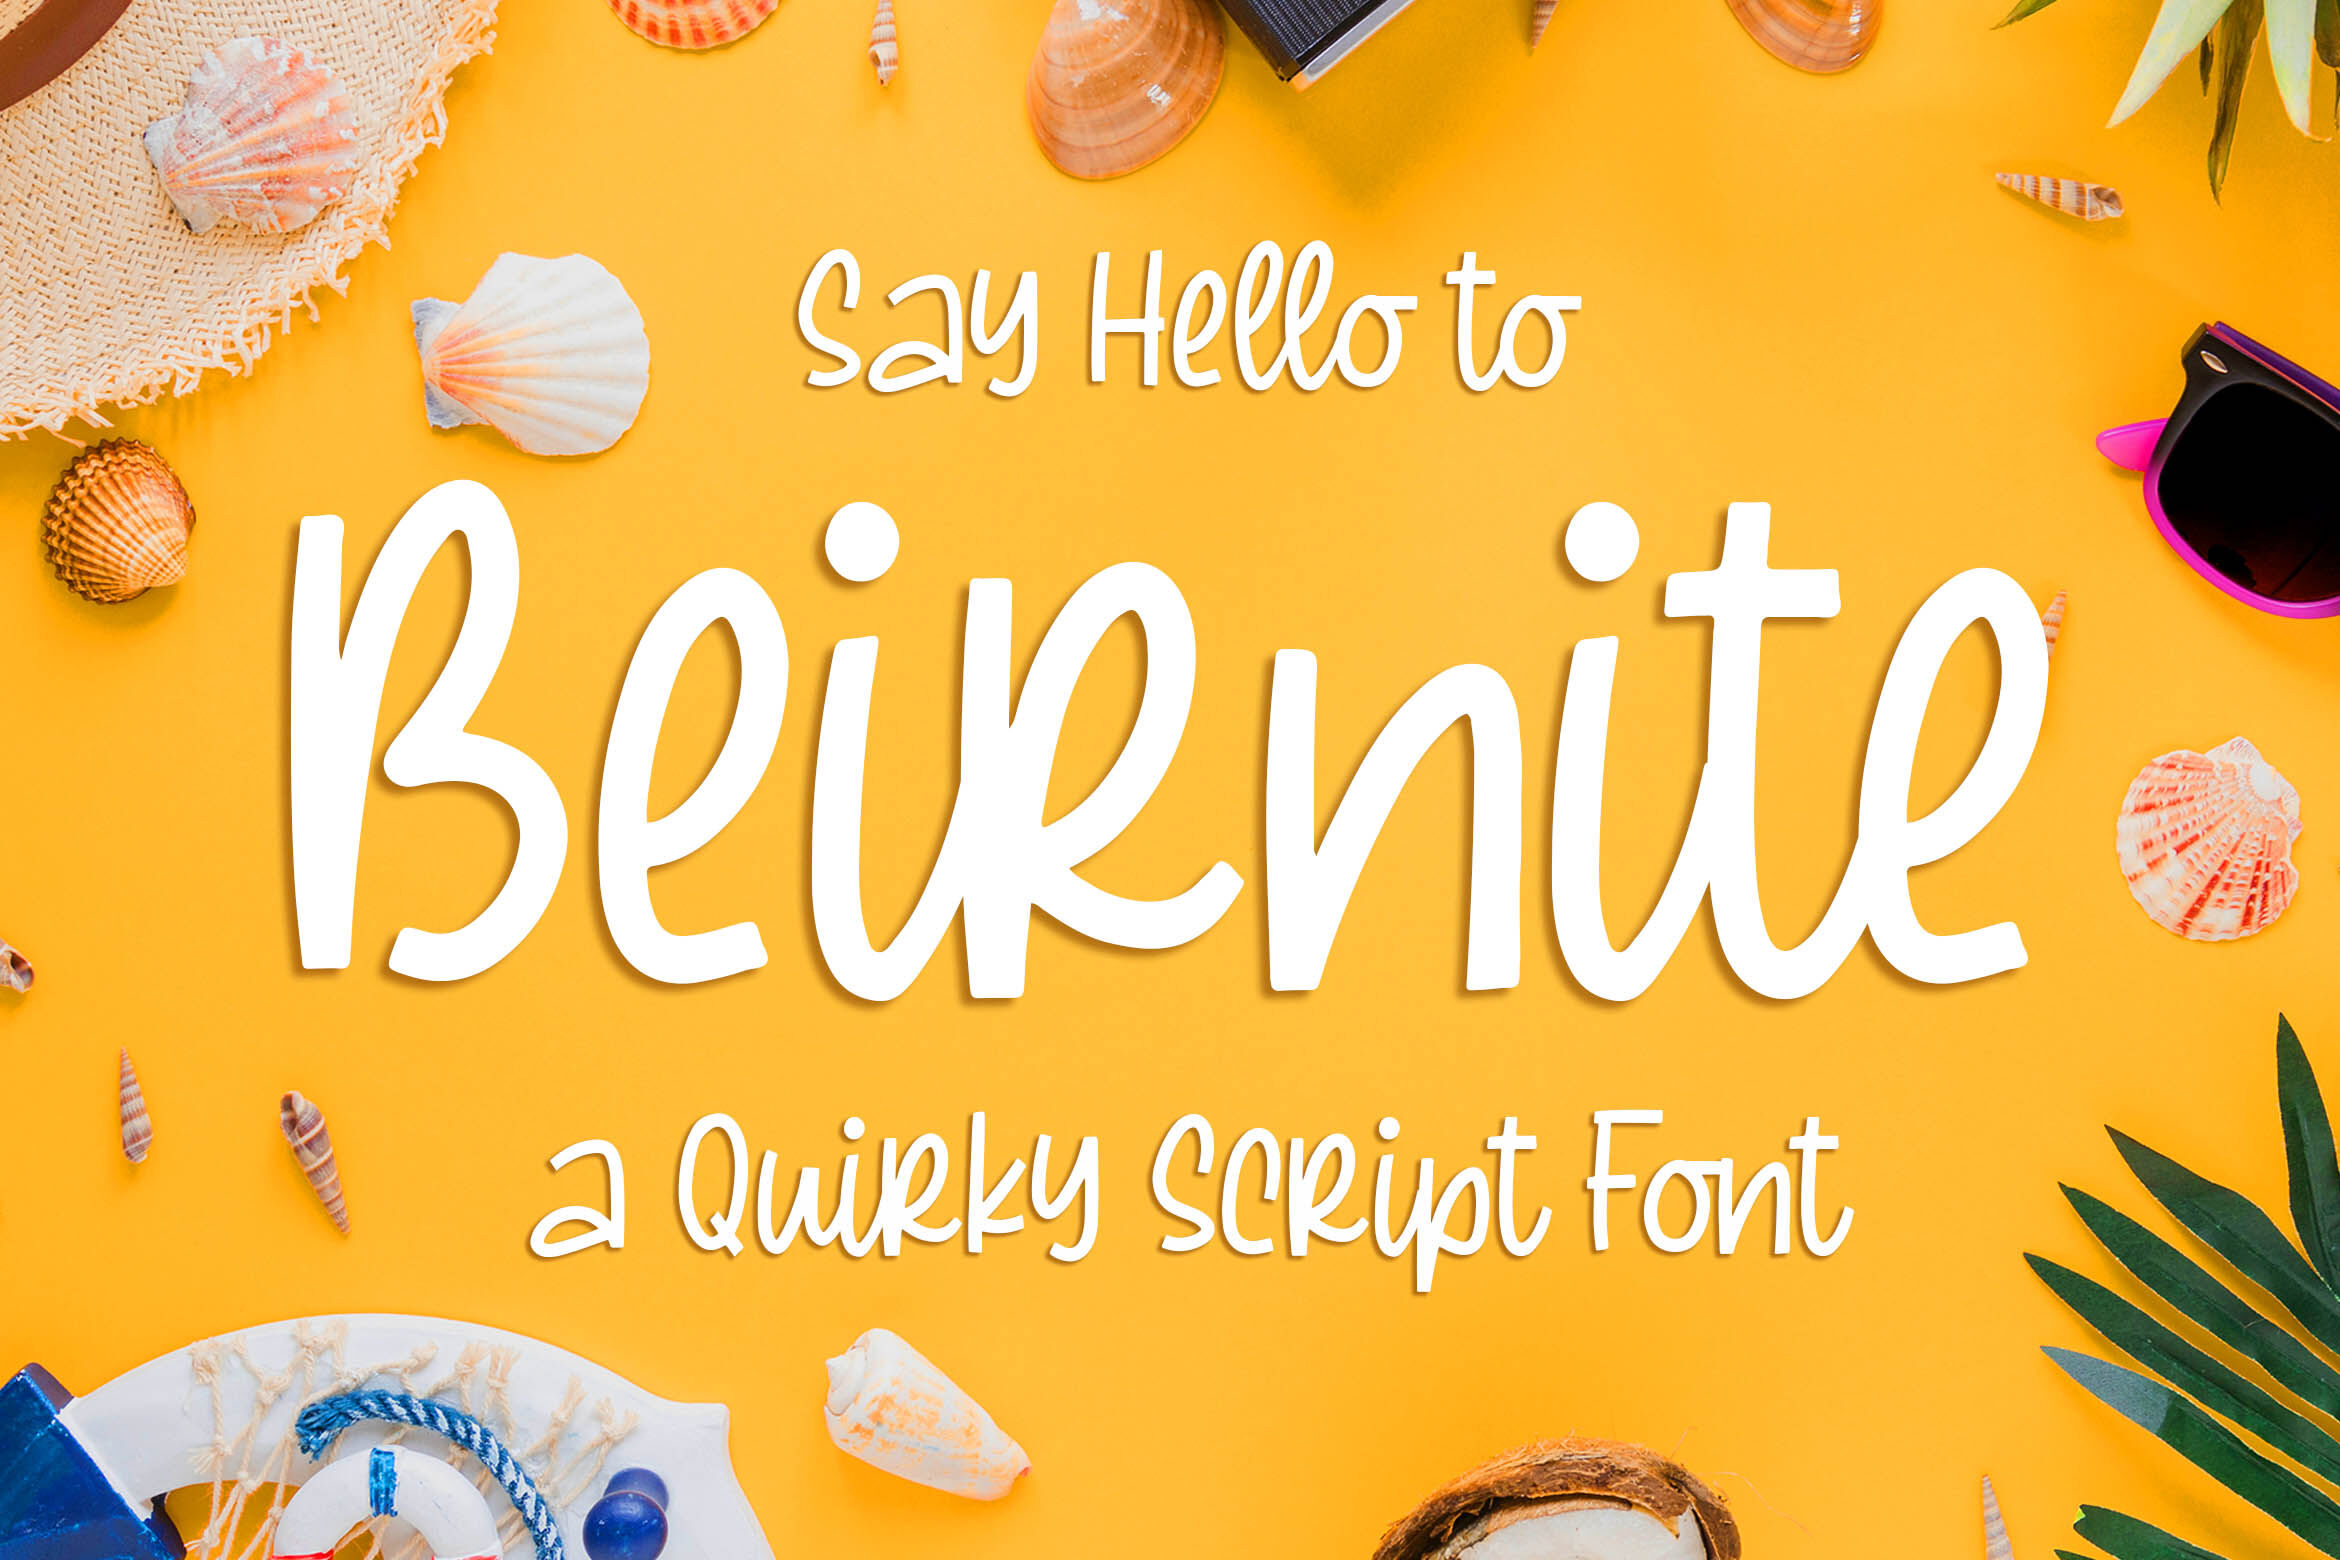 Beirnite A Quirky Script Font By Blankids Thehungryjpeg Com